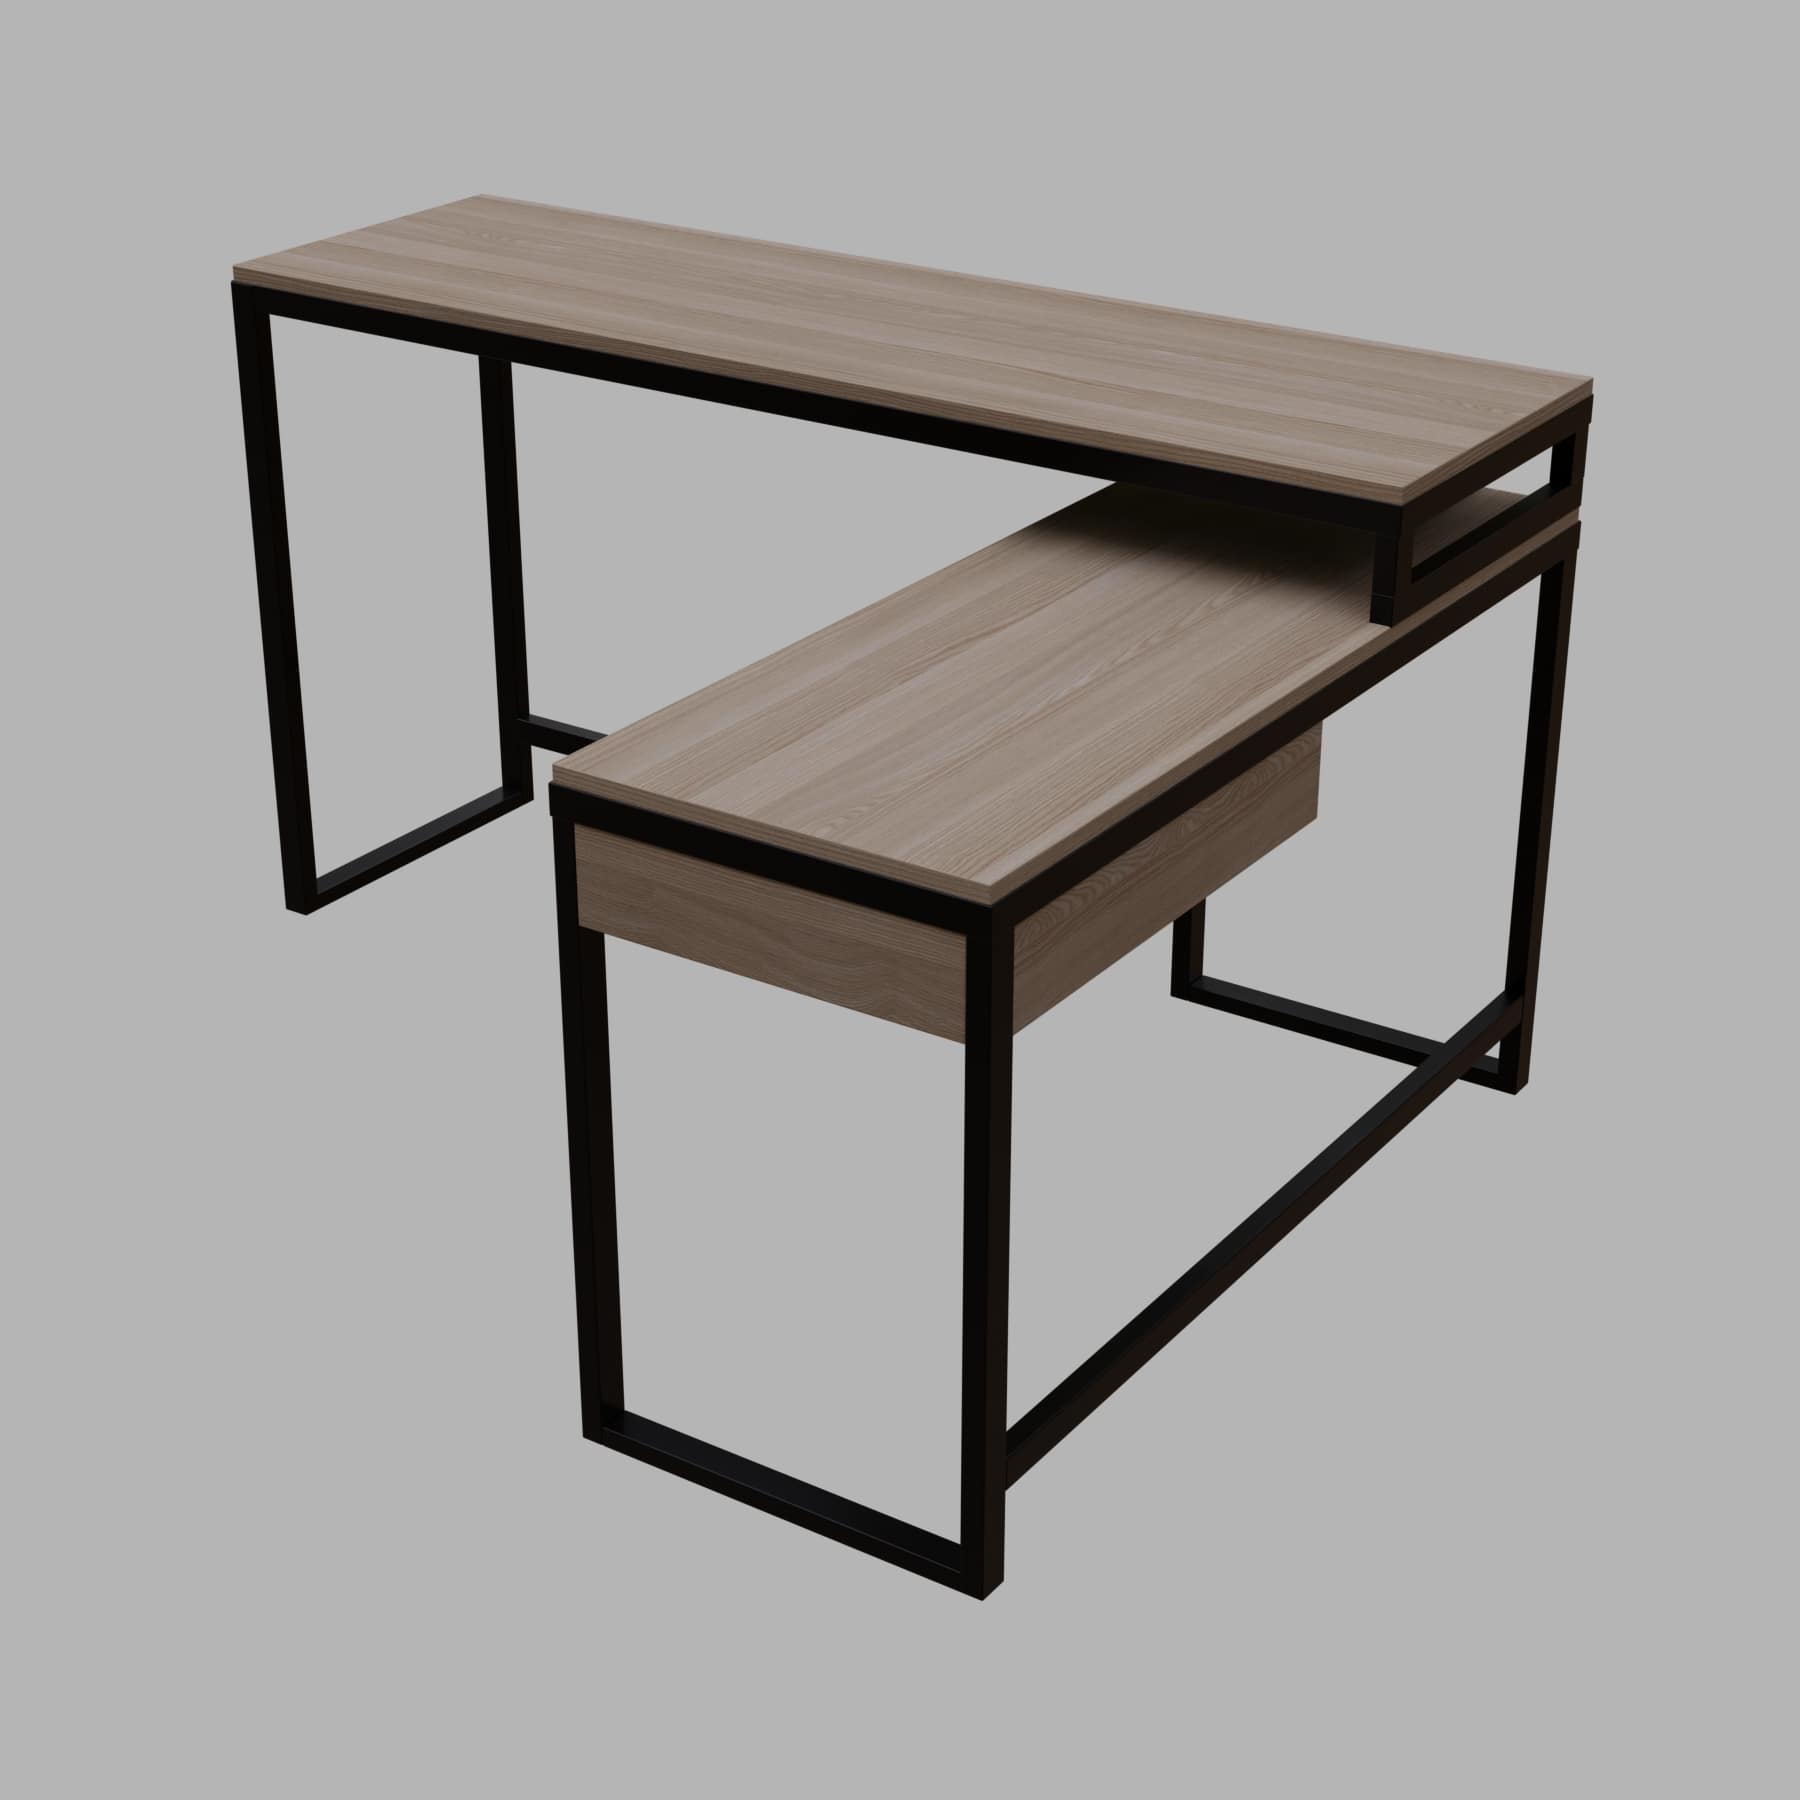 Enkele L Shaped Study Table with Storage Design in Wenge Color